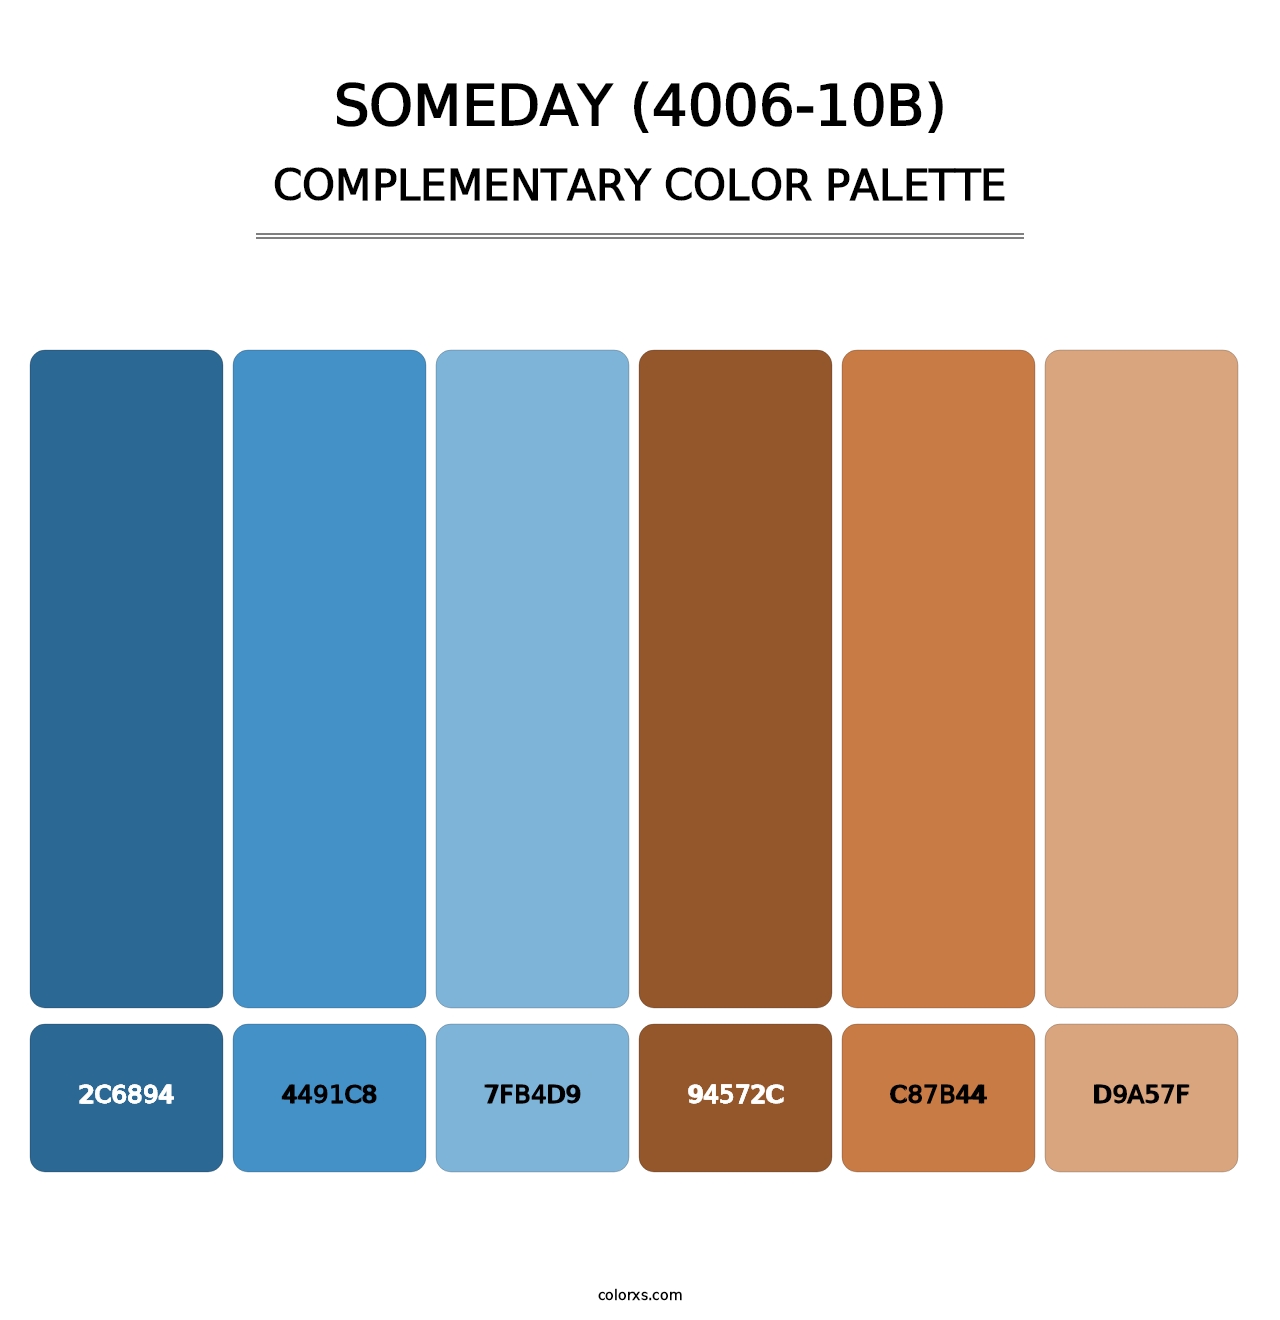 Someday (4006-10B) - Complementary Color Palette